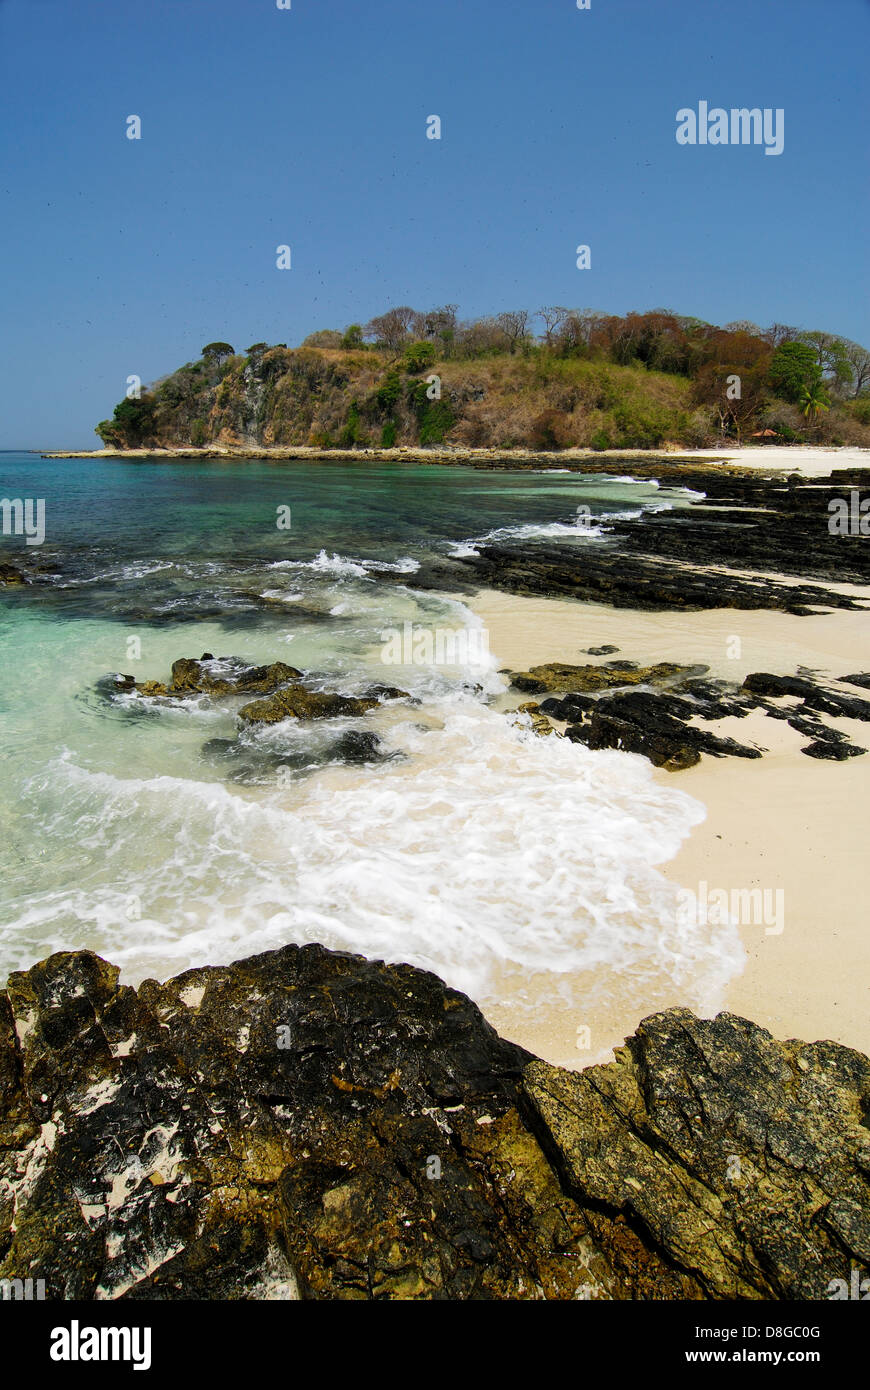 Rocky beach and forest in Contadora island Stock Photo